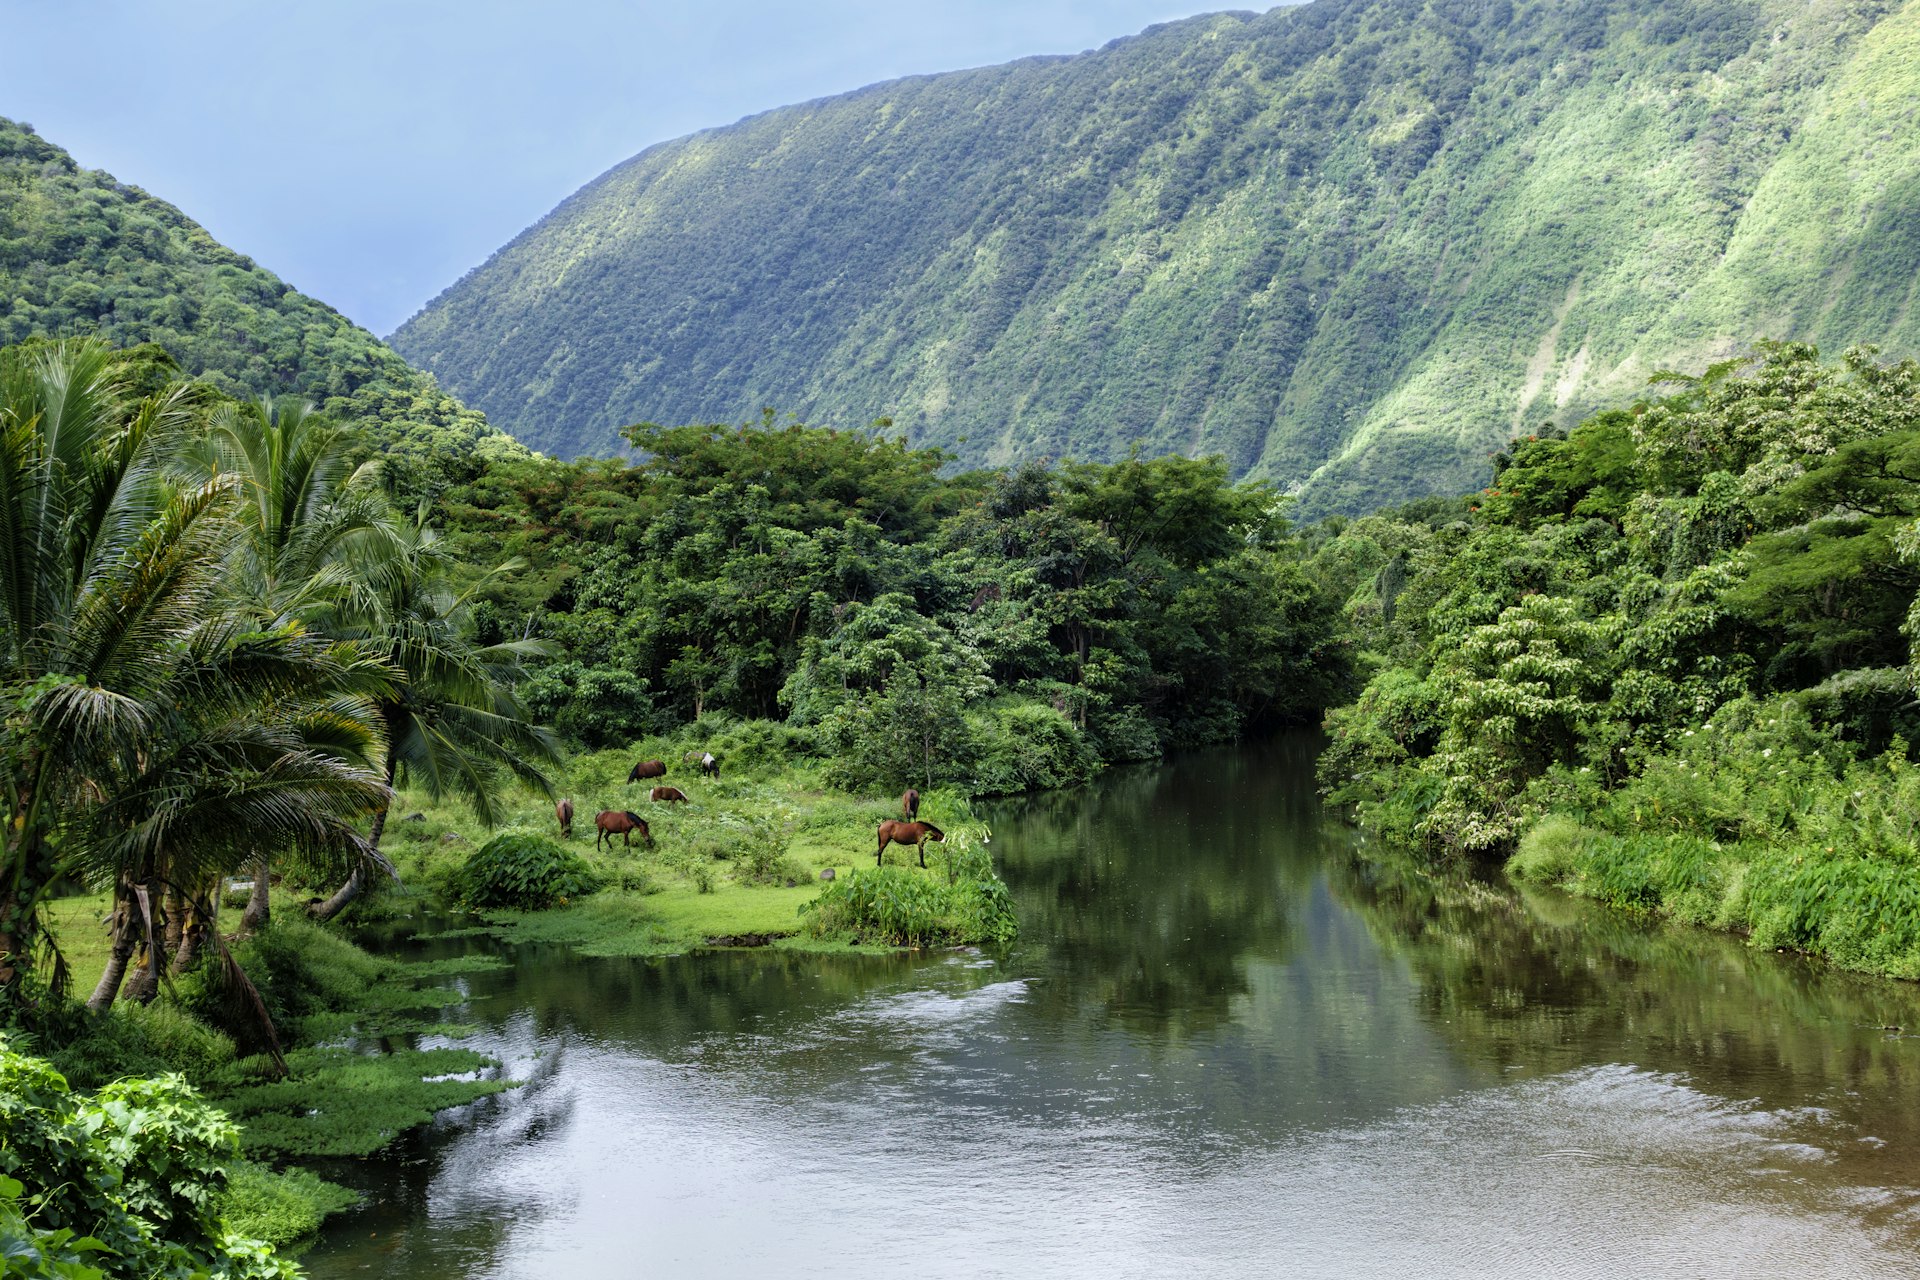 Wild horses on banks of Waipio Valley River, with high cliff walls in the background